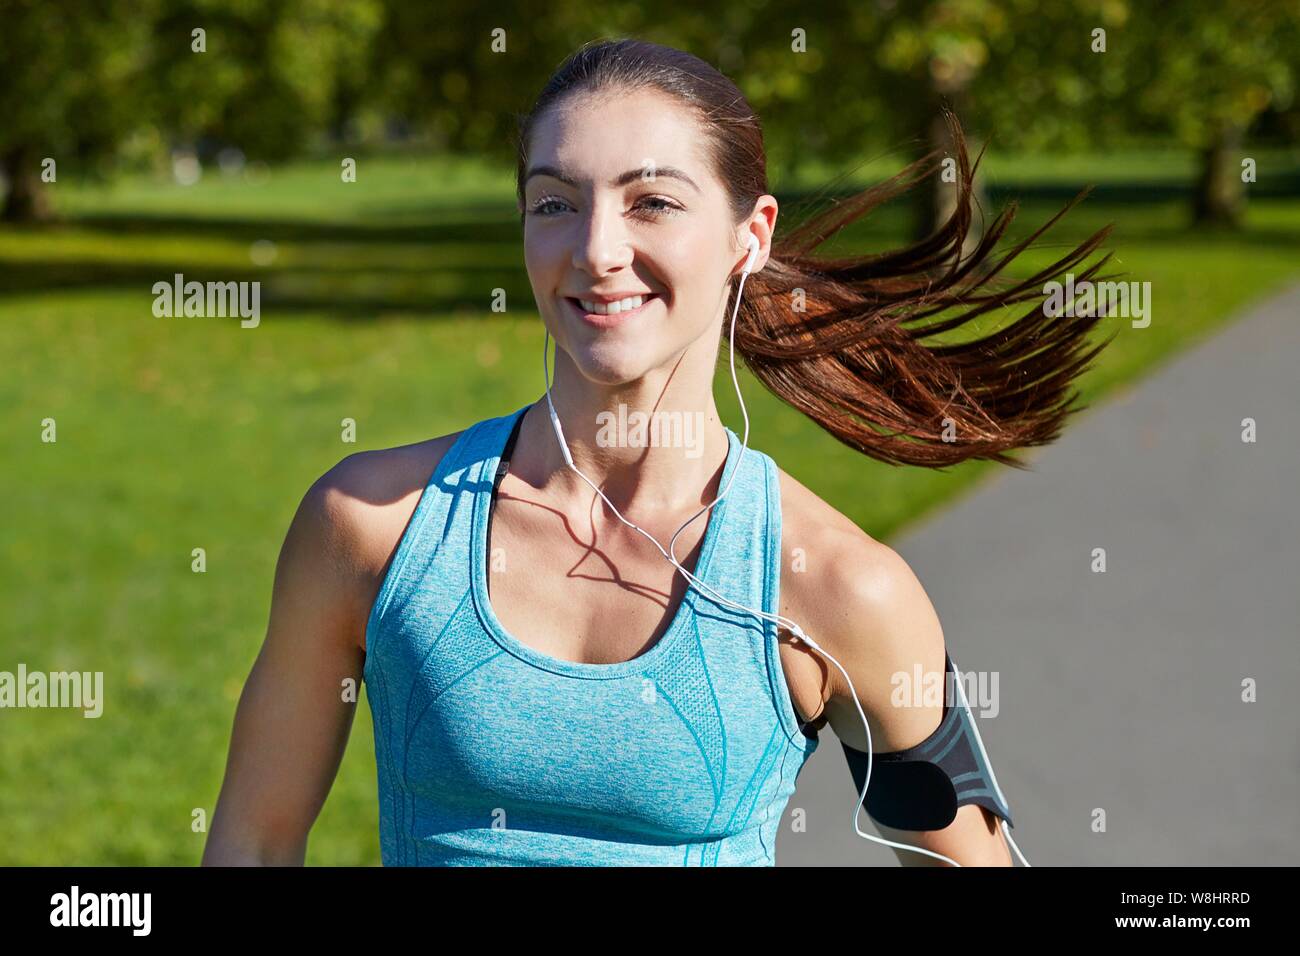 Young woman jogging on a path. Stock Photo